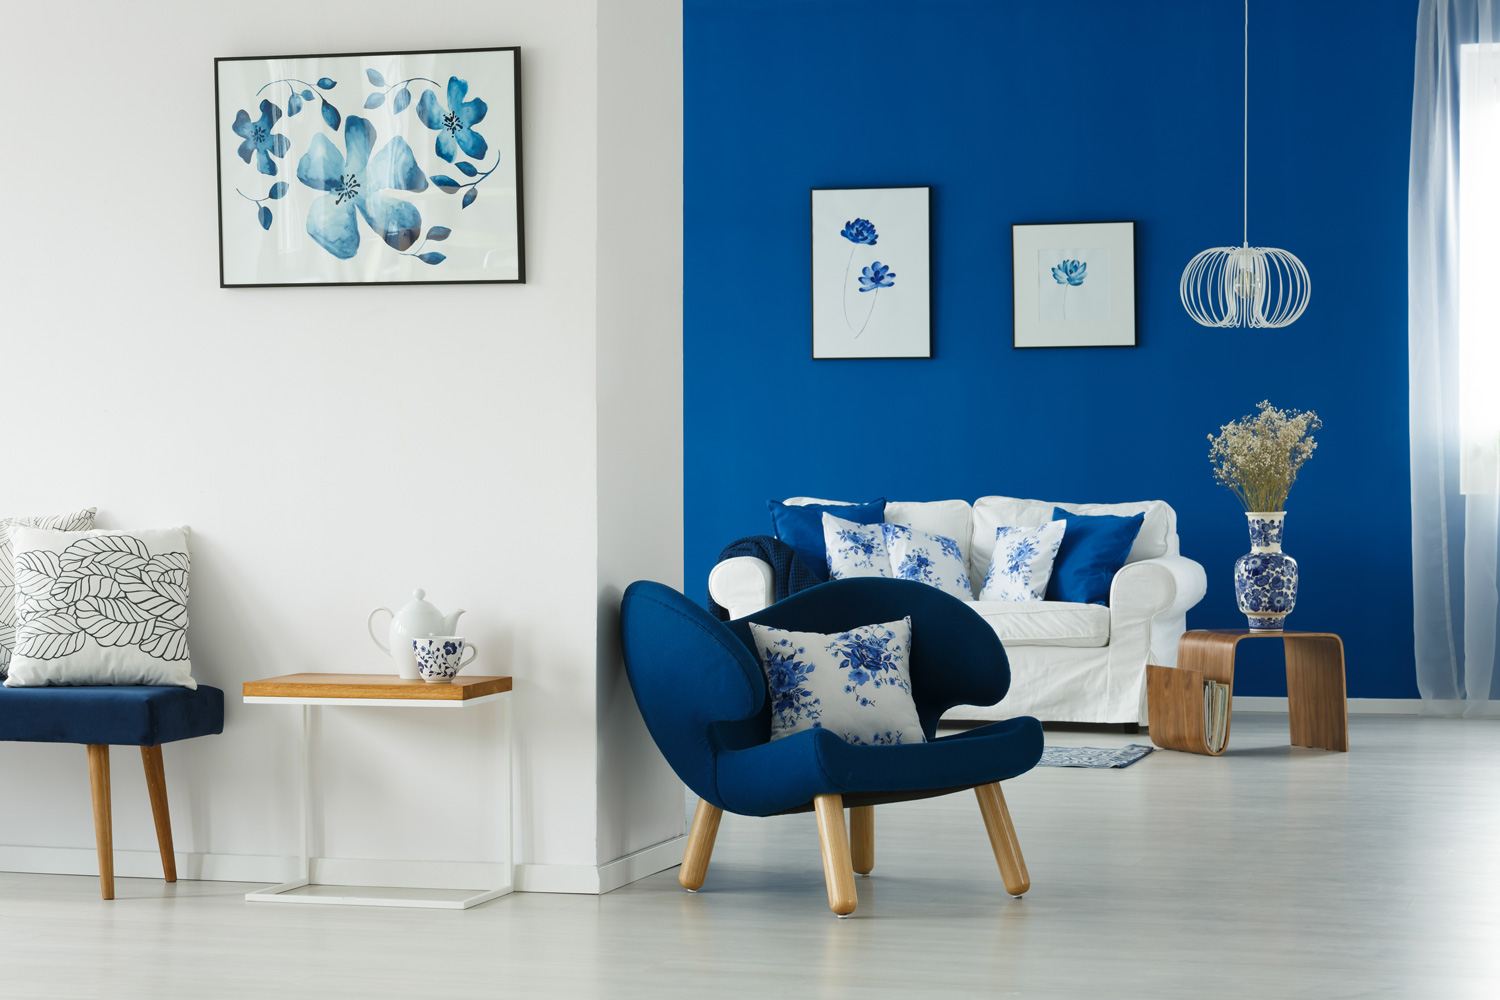 Cozy blue and white living room with flowery patterns on pillows and posters